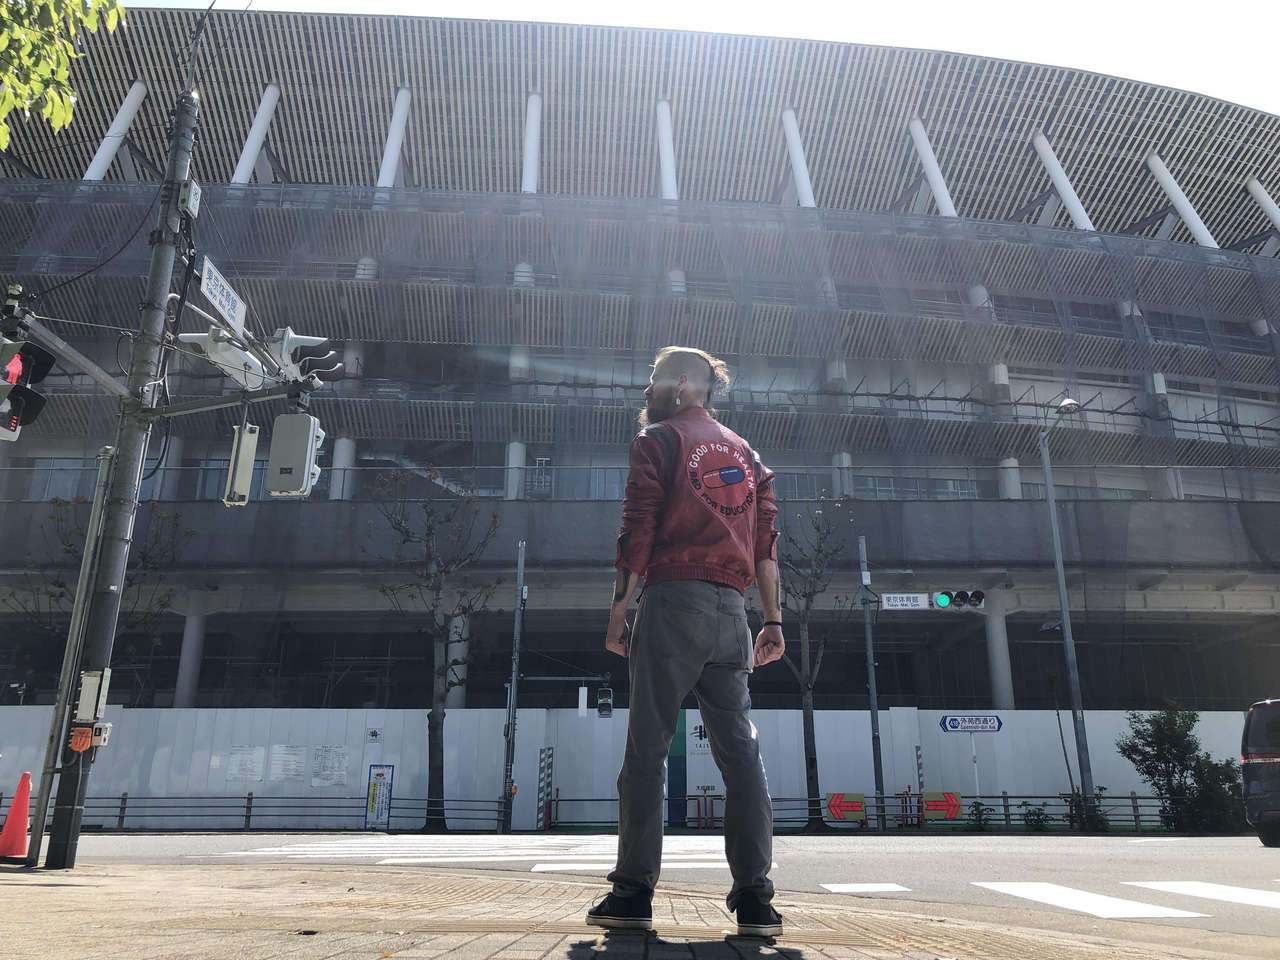 Me Cosplaying As Kaneda From Akira Walking To The 2020 Olympic Stadium In Toky